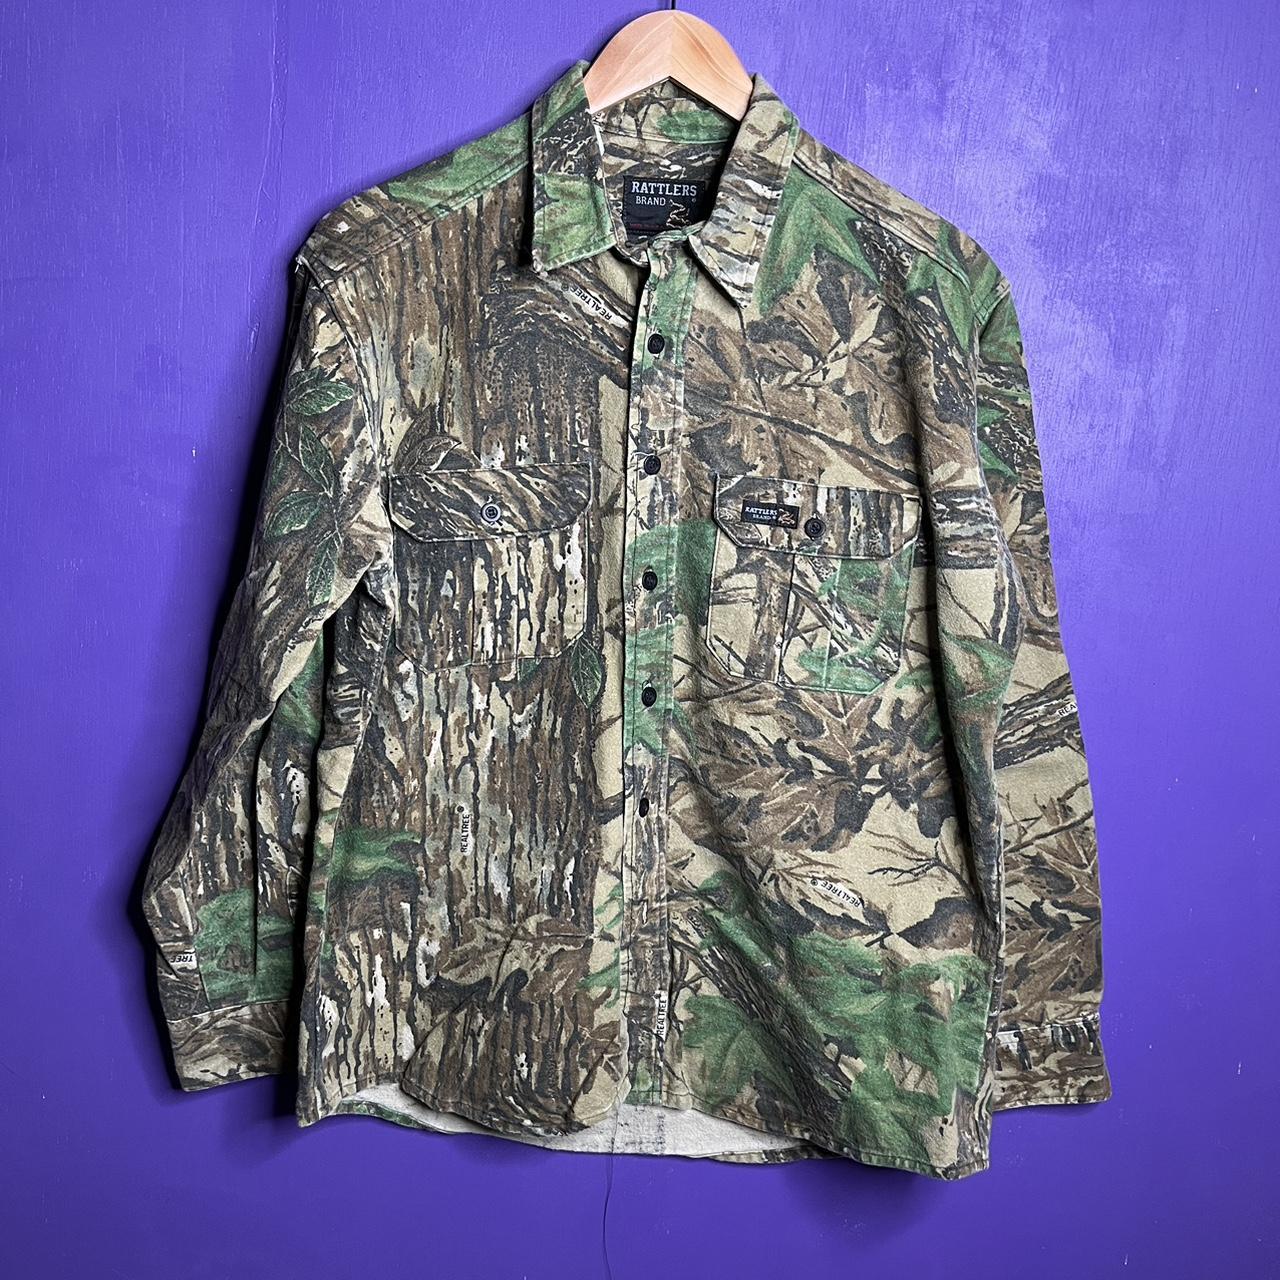 Vintage 90s Rattlers brand camo button up shirt. Is - Depop